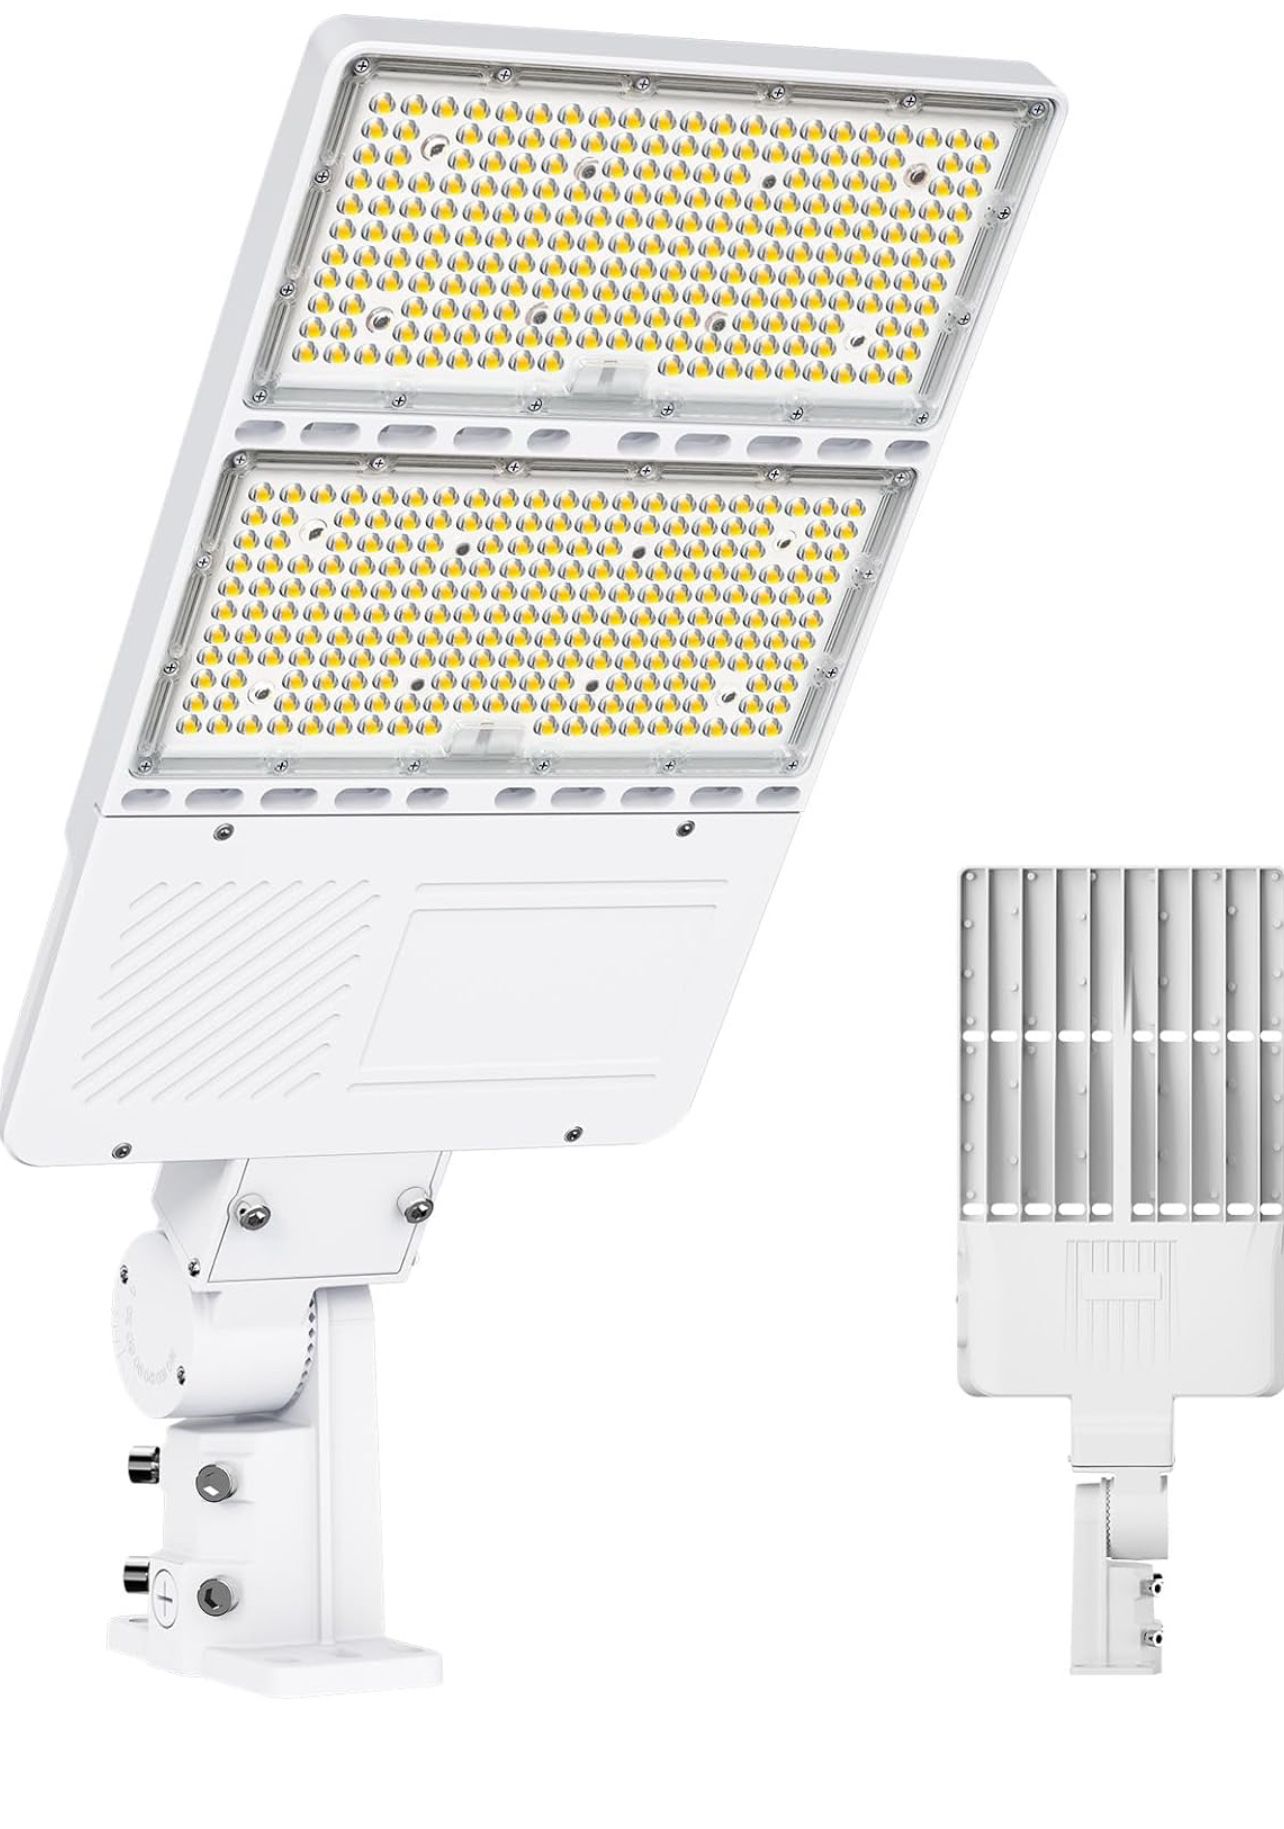 320W LED Parking Lot Light, UL Listed 44800Lm 5000K IP65 Commercial Street Lights Outdoor Area Lighting with Dusk to Dawn Photocell 100-277V Shoebox L